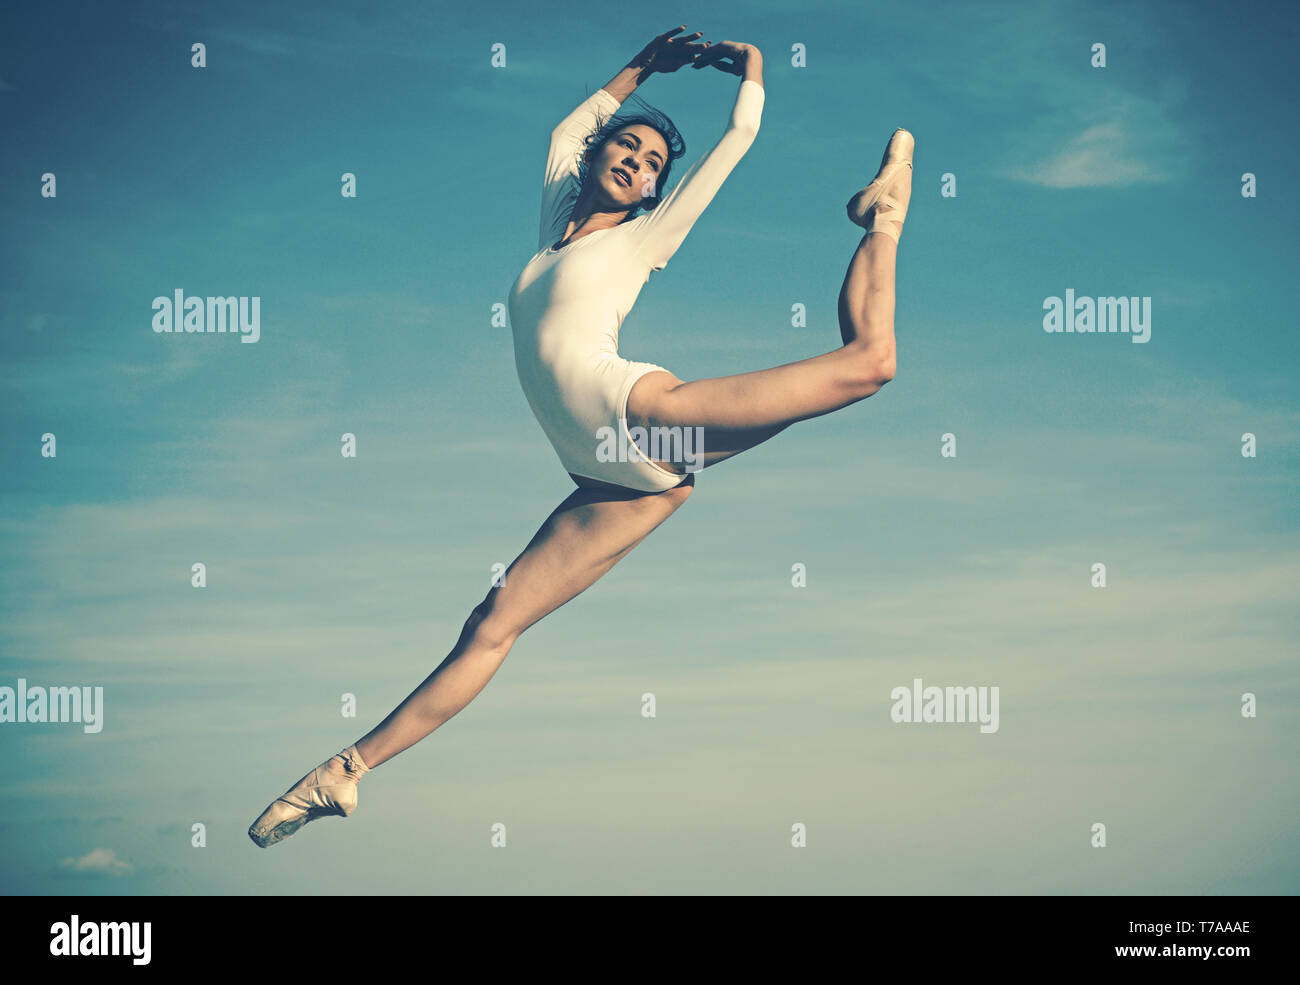 Practicing the art of classical ballet. Young ballerina jumping on blue sky. Pretty woman in dance wear. Cute ballet dancer. Concert performance dance Stock Photo